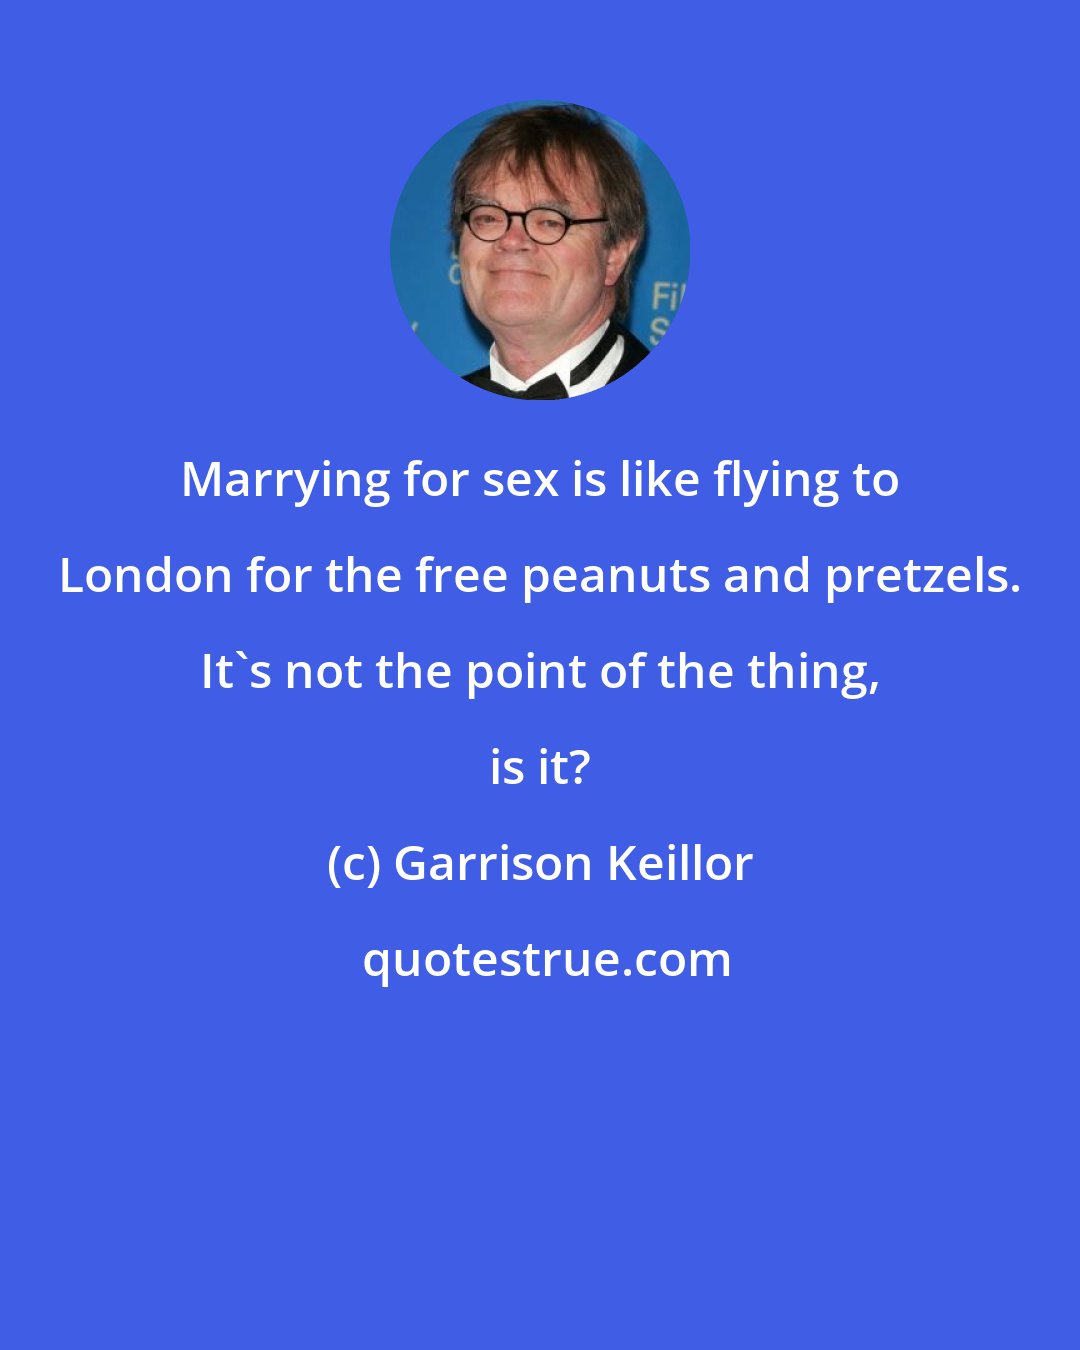 Garrison Keillor: Marrying for sex is like flying to London for the free peanuts and pretzels. It's not the point of the thing, is it?